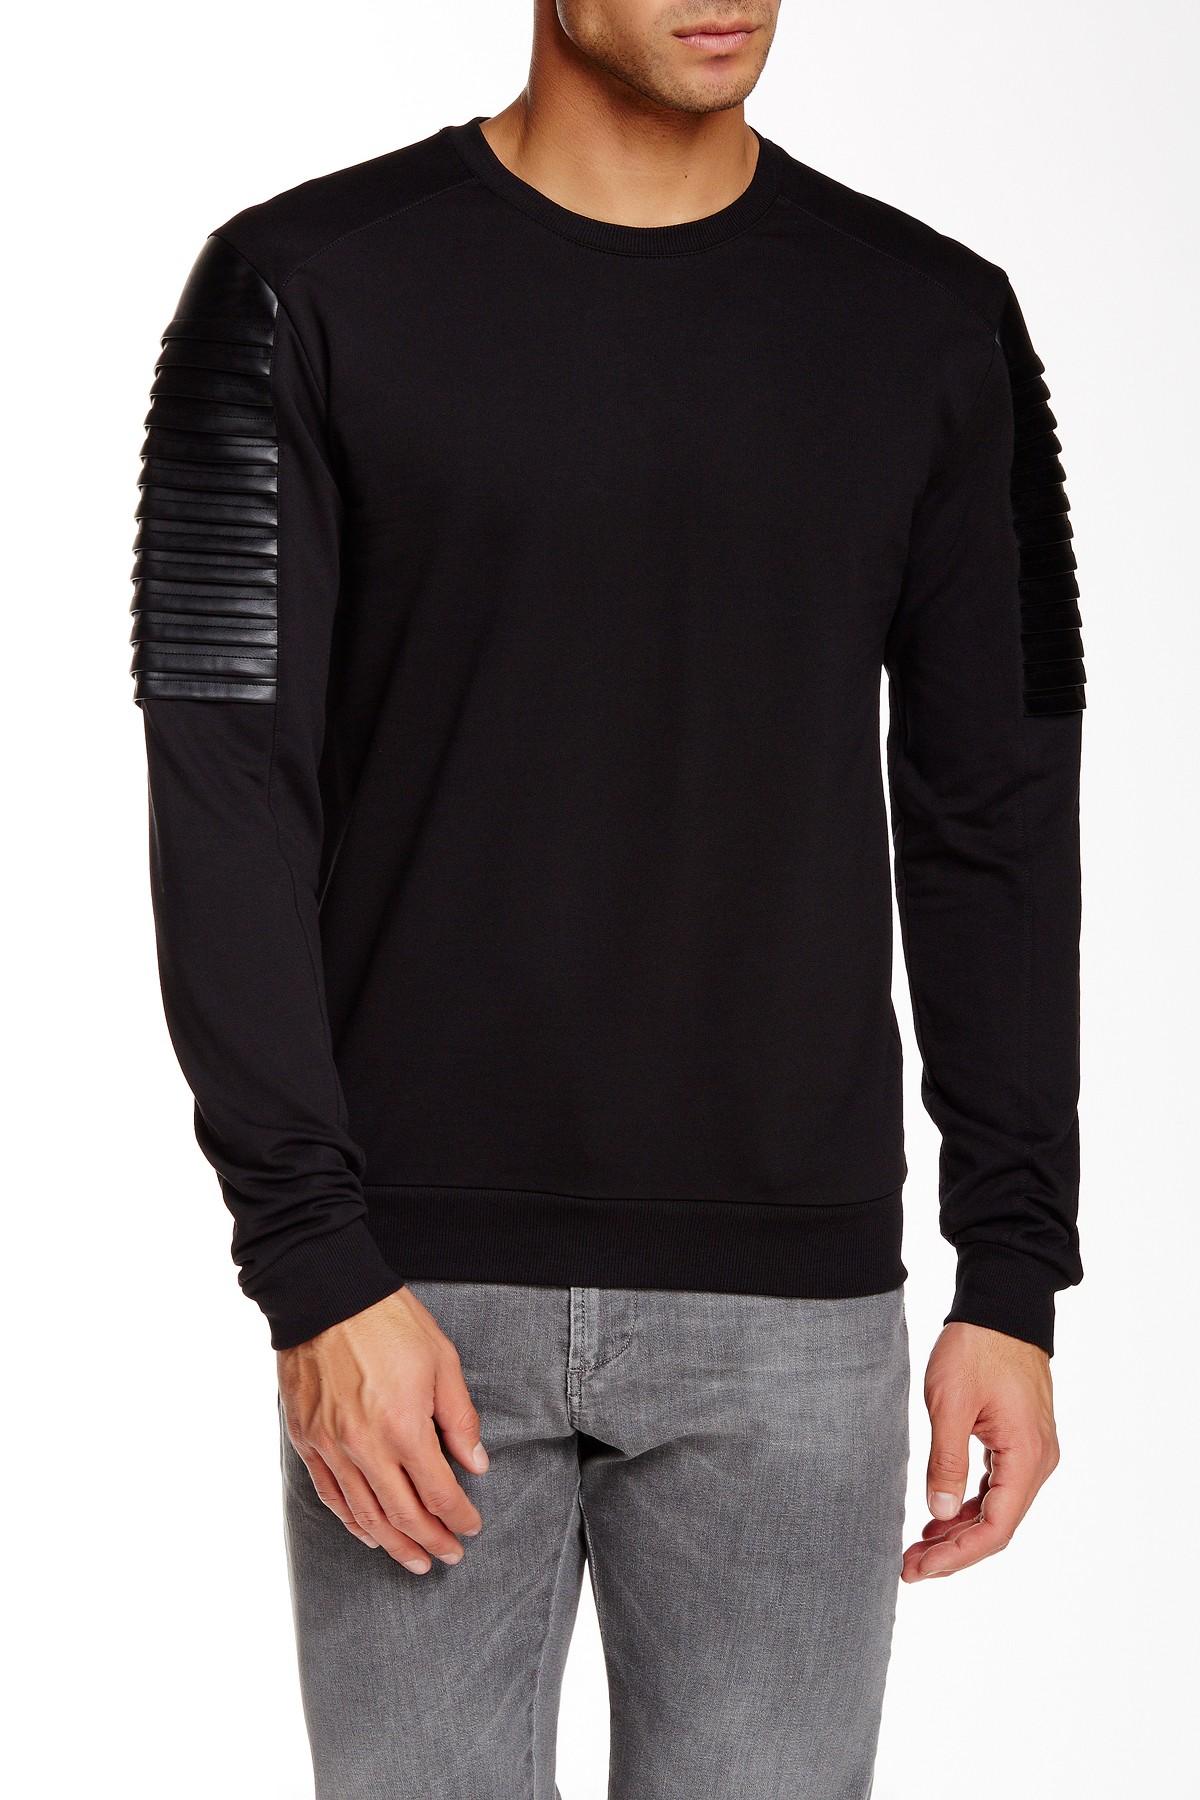 Versace Cotton Faux Leather Panel Crew Neck Sweater in Black for Men - Lyst